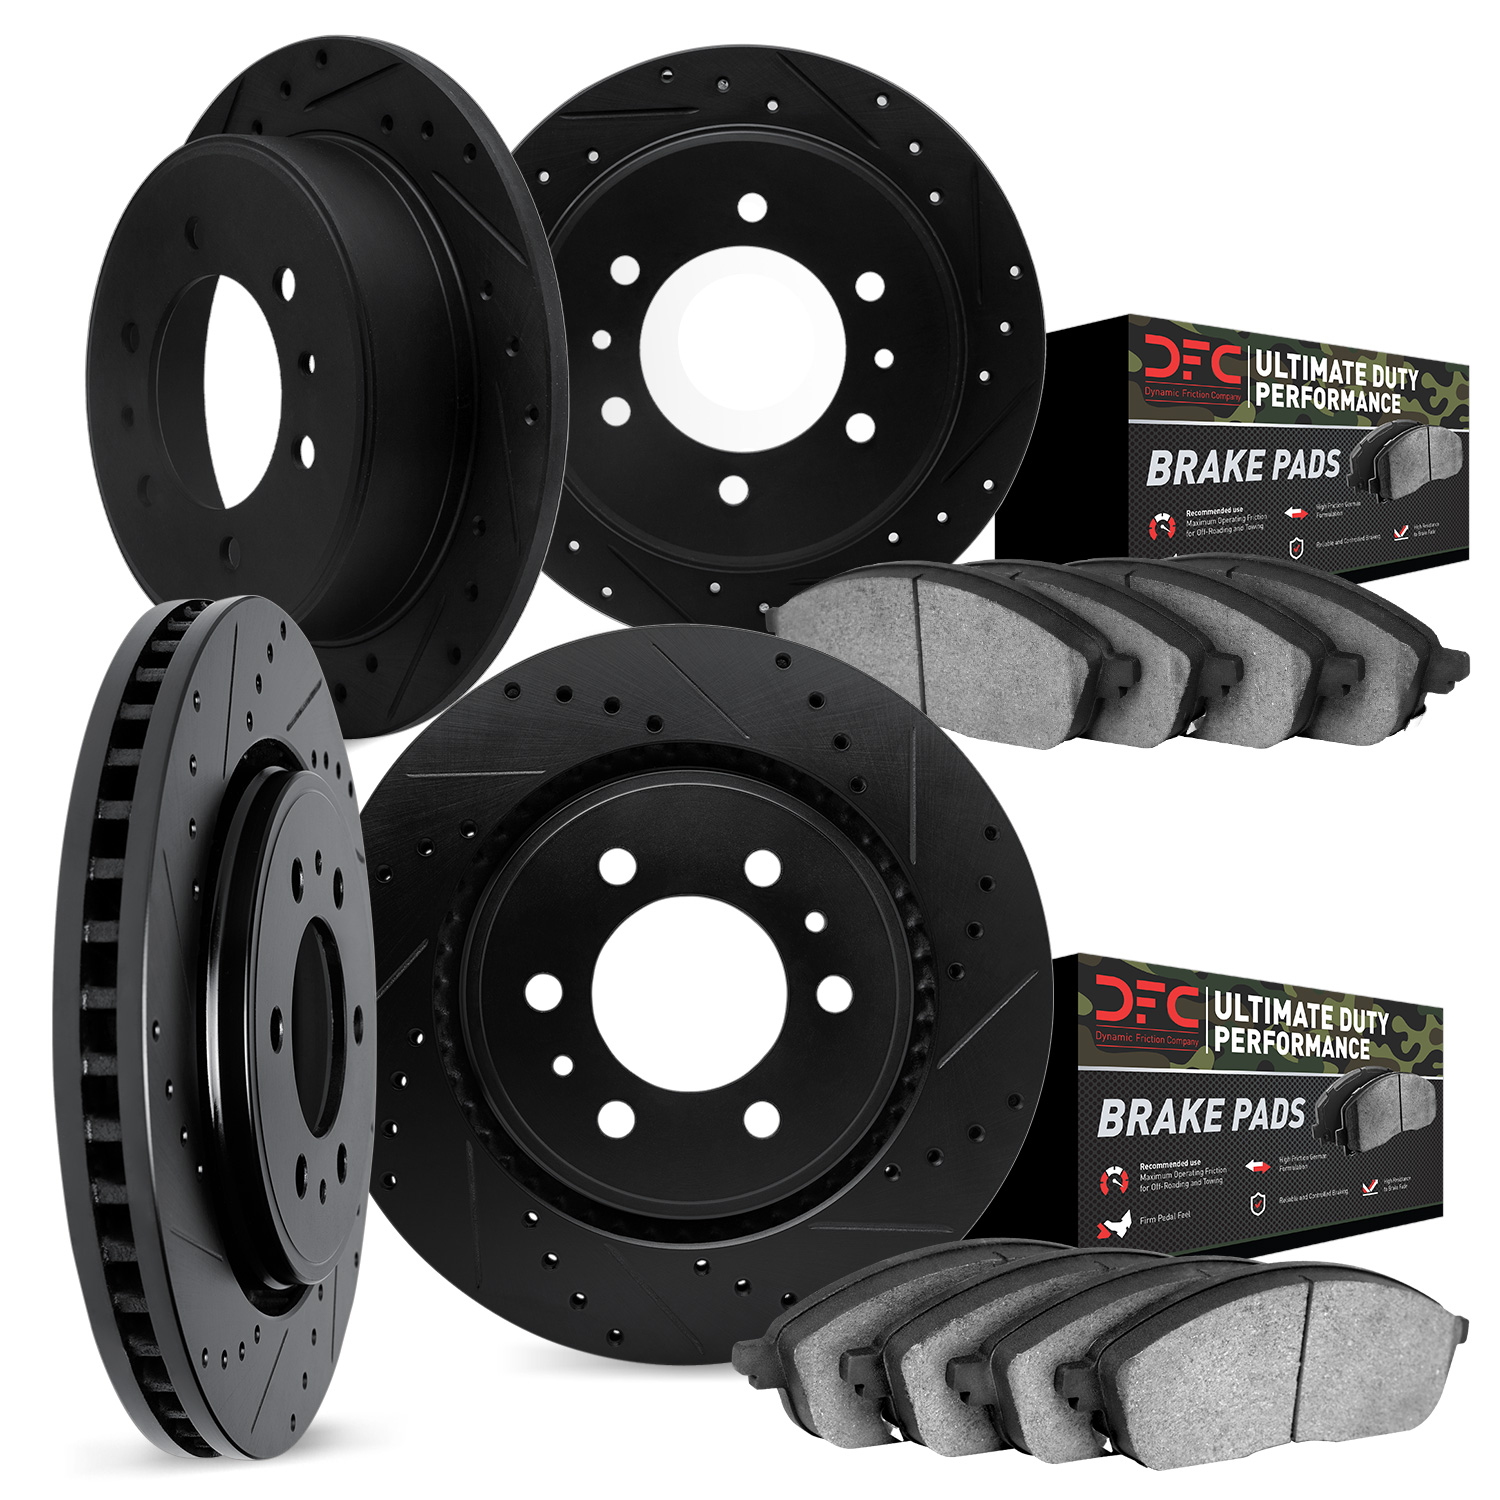 8404-67004 Drilled/Slotted Brake Rotors with Ultimate-Duty Brake Pads Kit [Black], 2007-2015 Infiniti/Nissan, Position: Front an